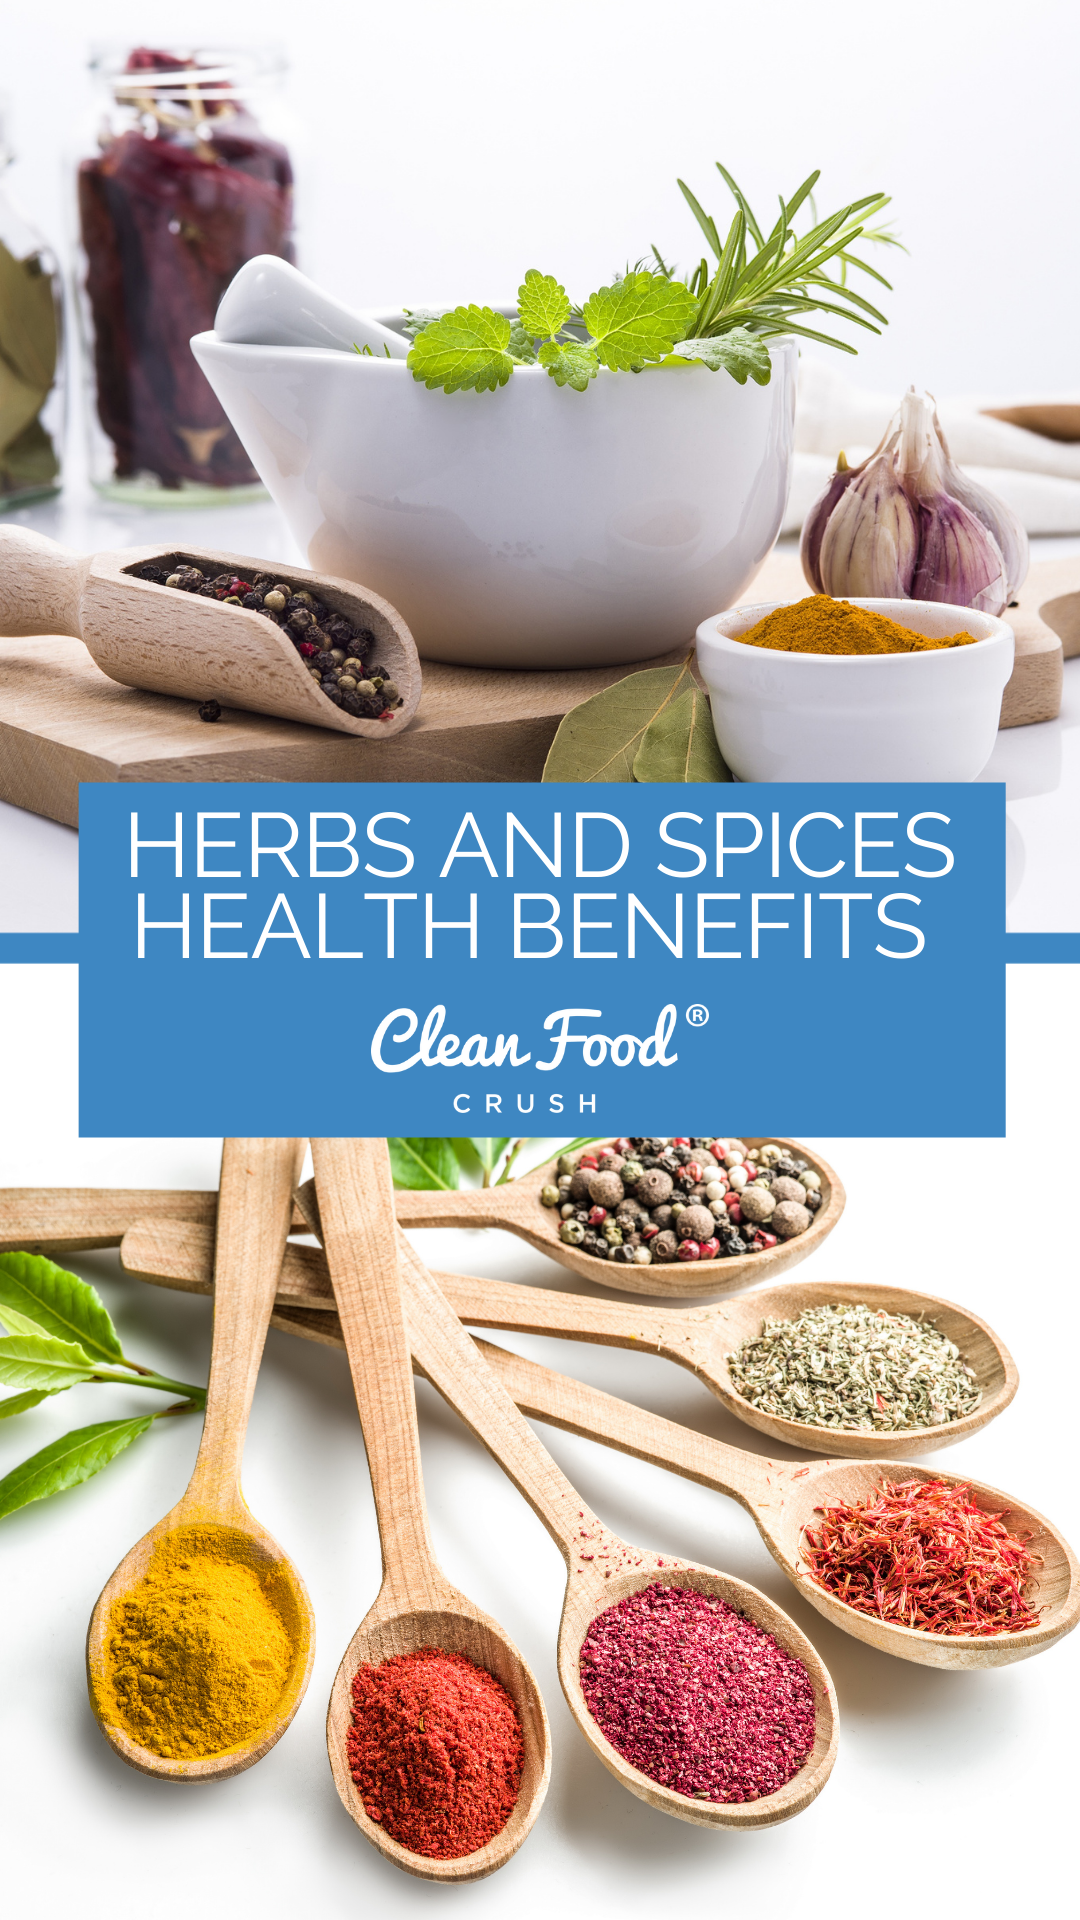 https://cleanfoodcrush.com/wp-content/uploads/2021/08/nutritional-benefits-of-herbs-and-spices.png